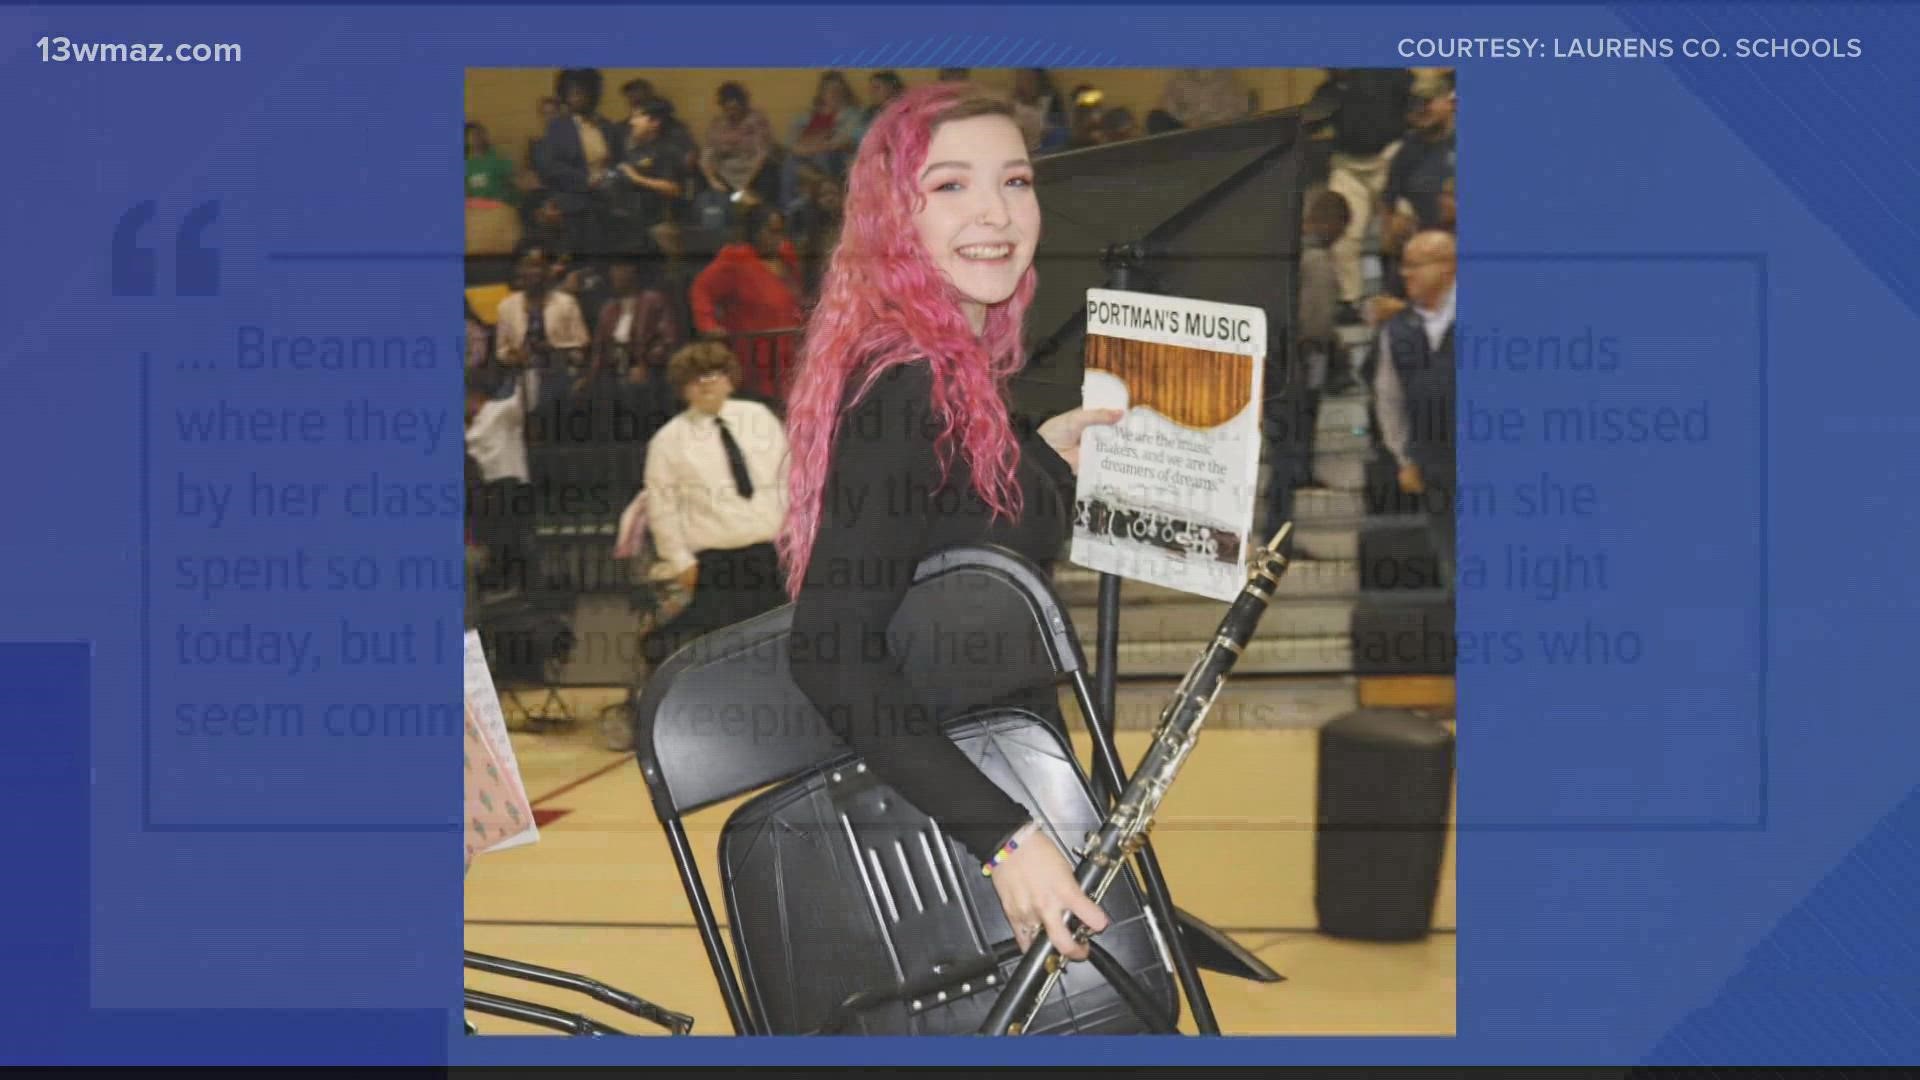 According to a Facebook post from the Laurens County School District, East Laurens High School senior Breanna Dice was on her way to school when the crash happened.